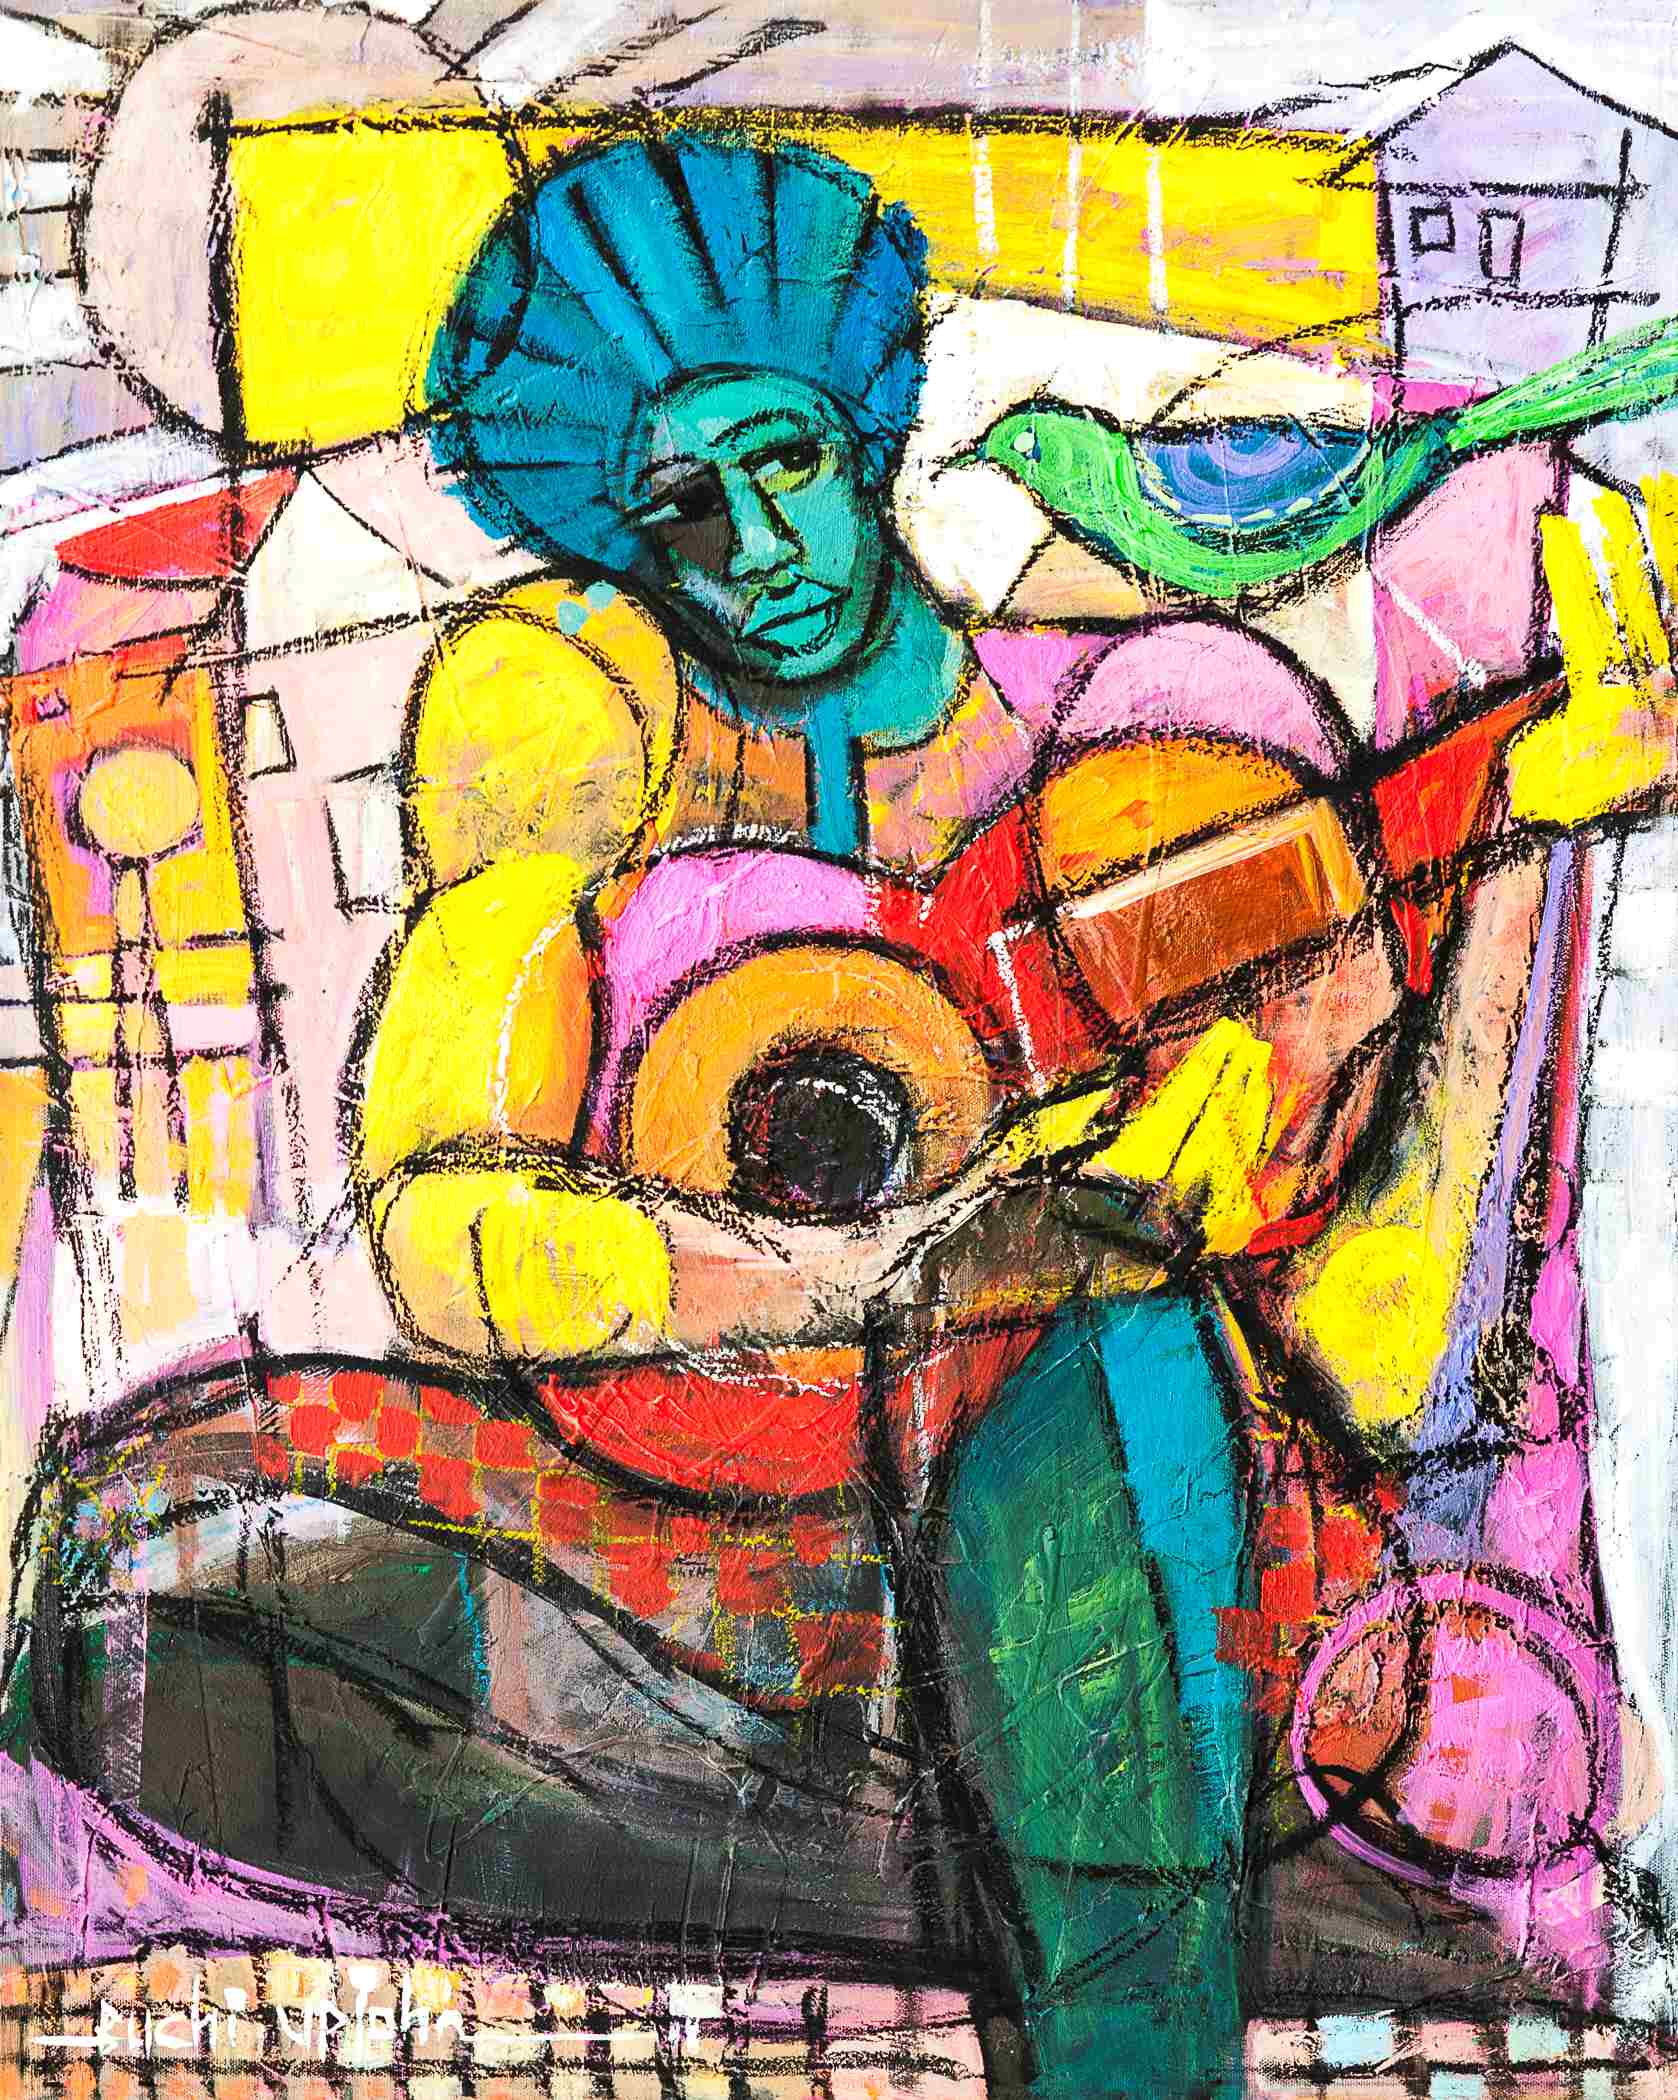 Colorful Artwork of Man Playing Guitar at PERSPECTIVE Exhibition at Navy Pier